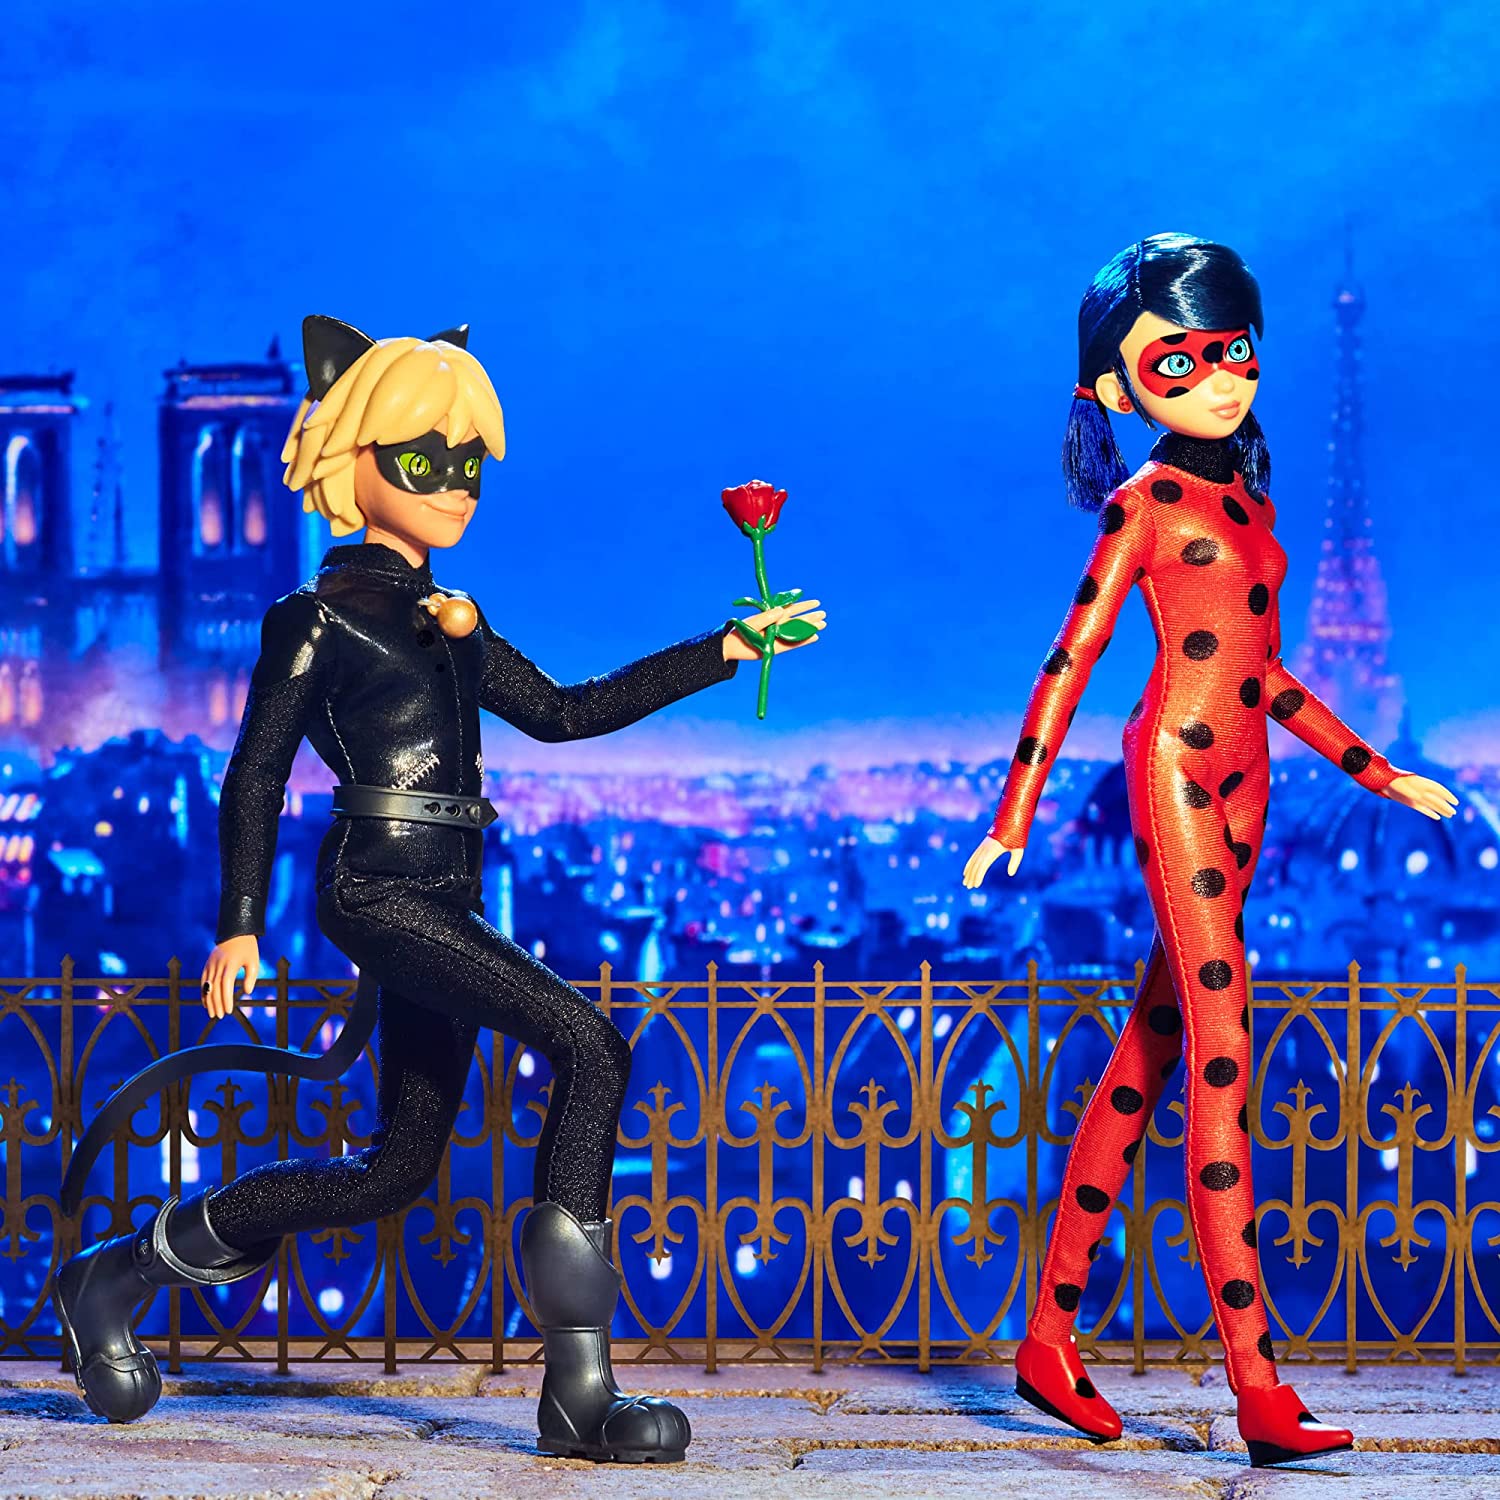 Miraculous Ladybug and Cat Noir Awakening movie pictures, images